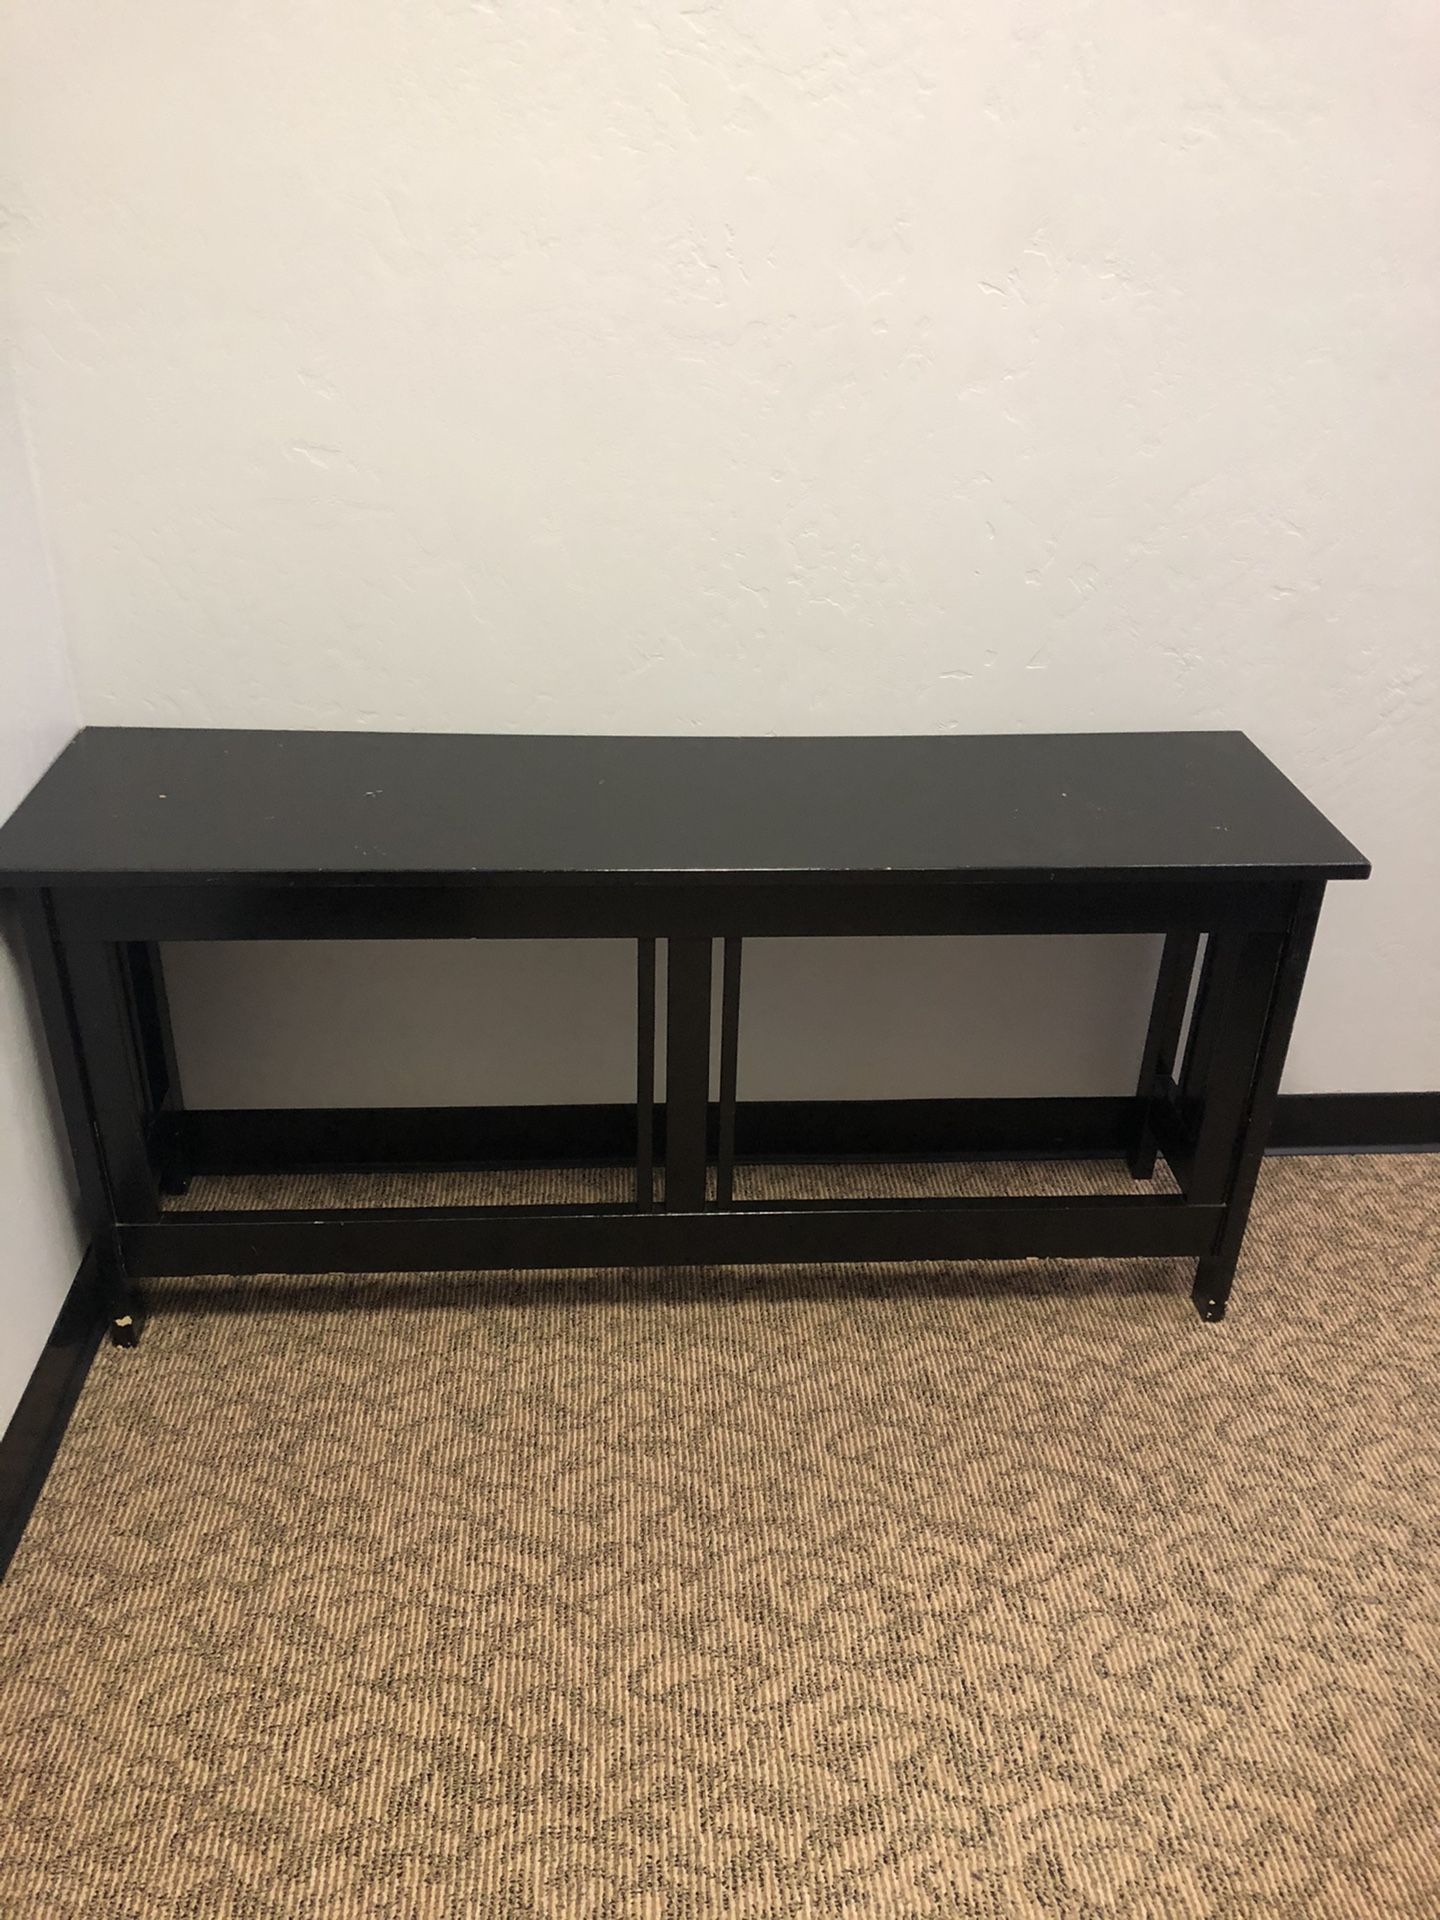 Black sofa table- 57 in long - 16 inches deep- 26 inches high